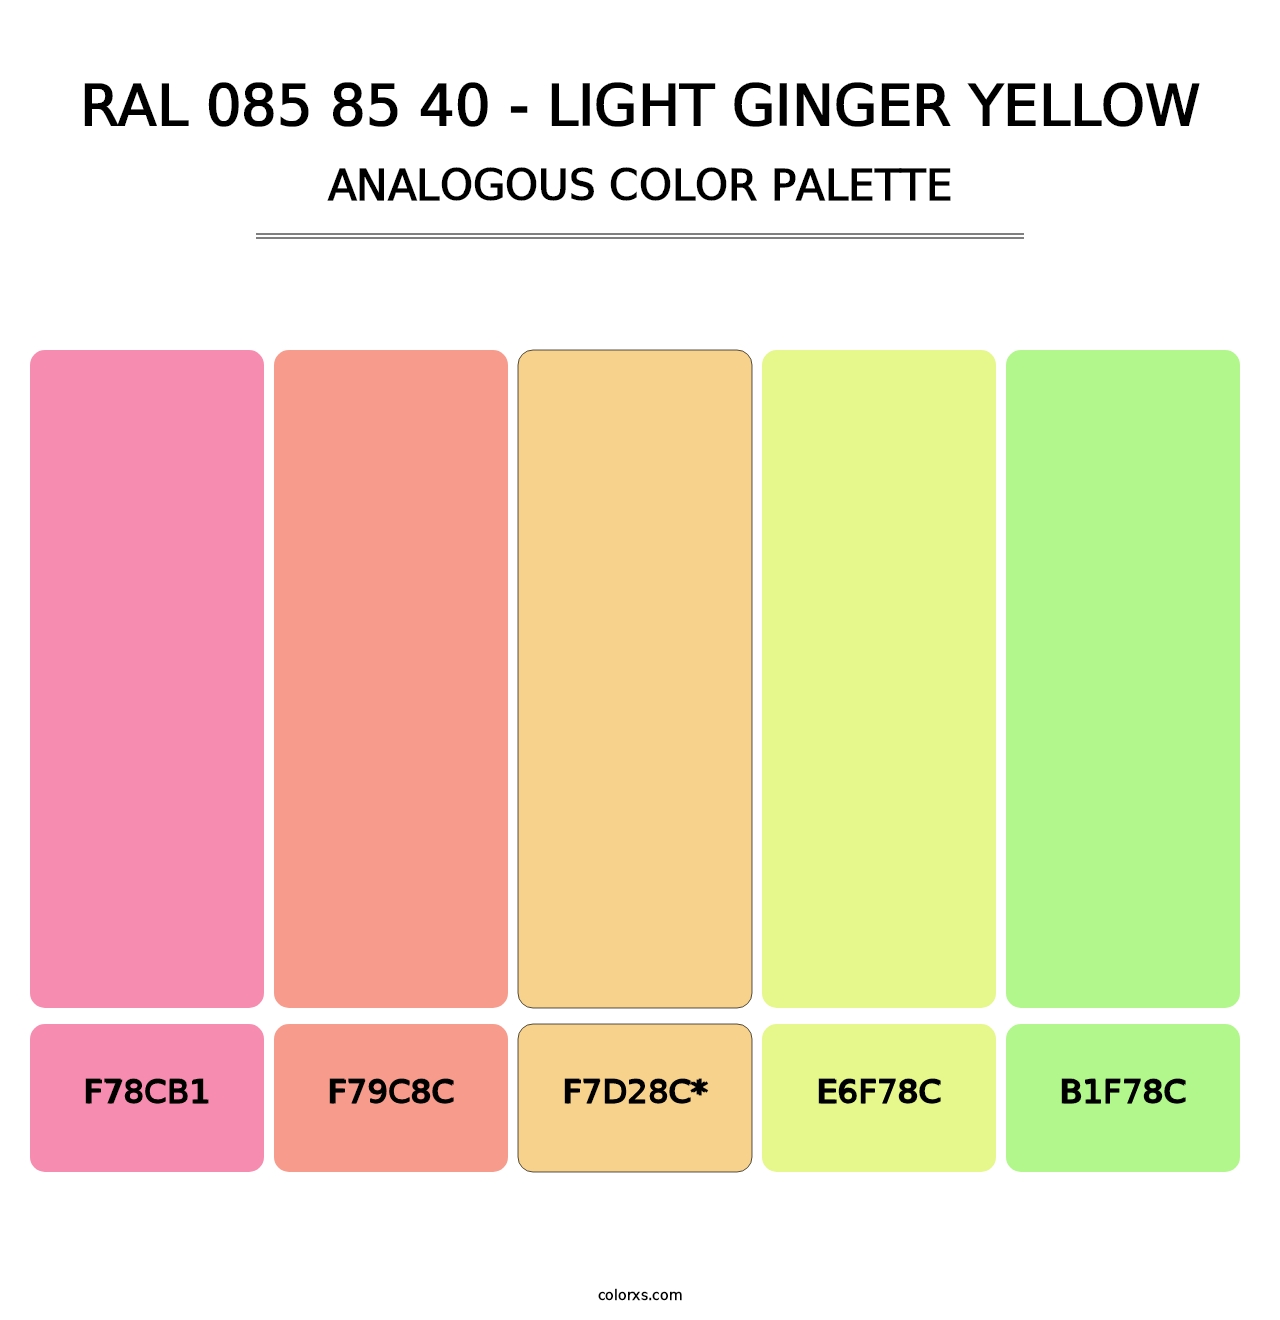 RAL 085 85 40 - Light Ginger Yellow - Analogous Color Palette